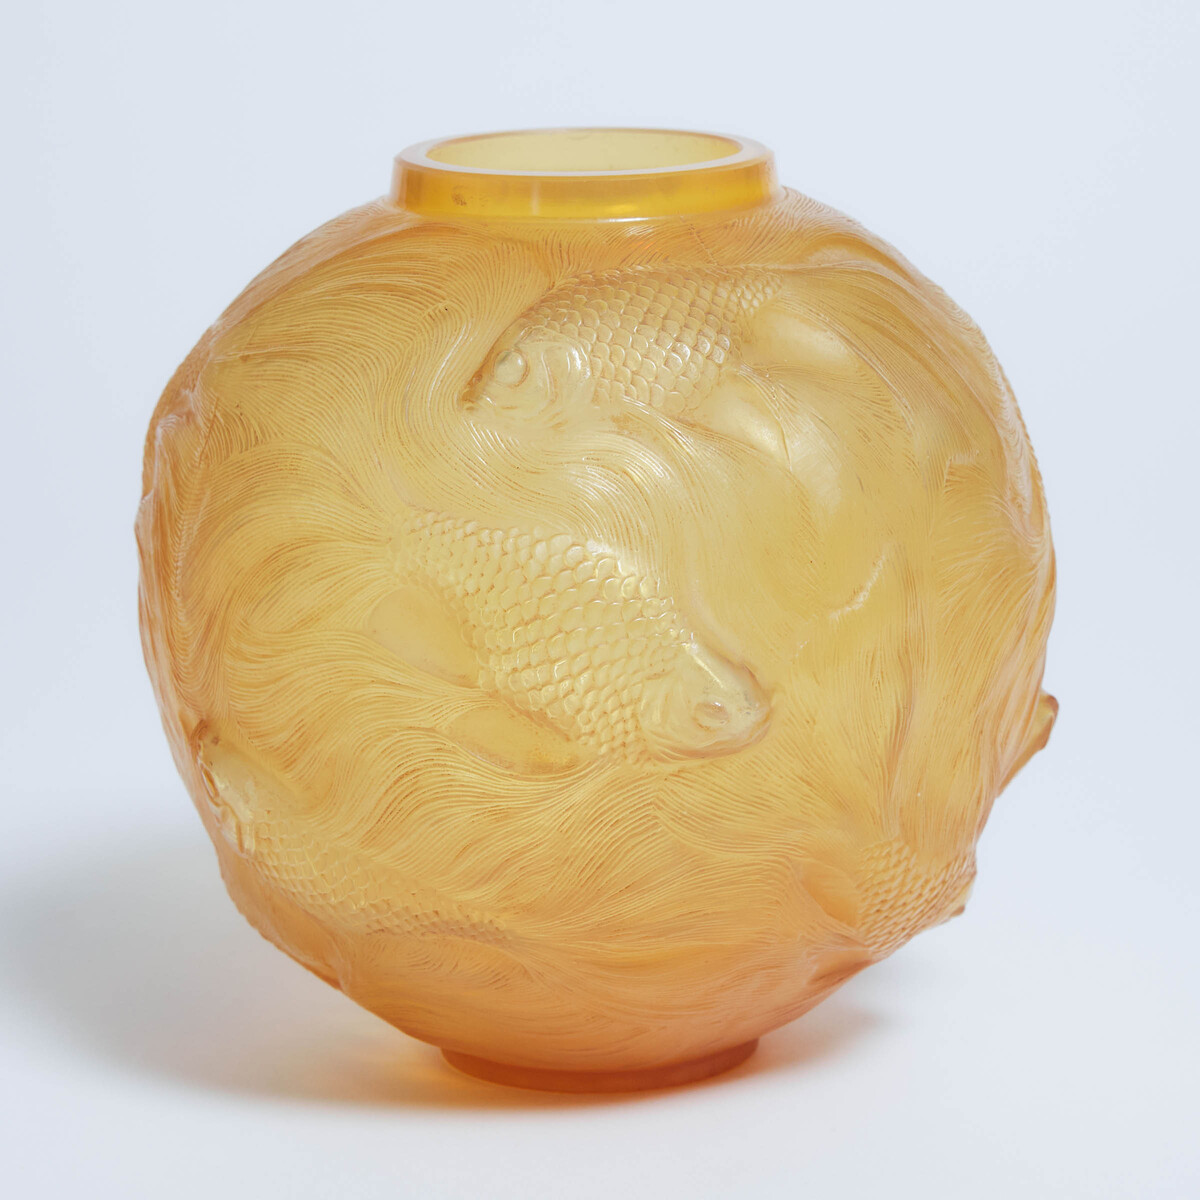 'Formose', Lalique Moulded and Partly Frosted Amber Glass Vase, c.1930, height 6.5 in — 16.5 cm